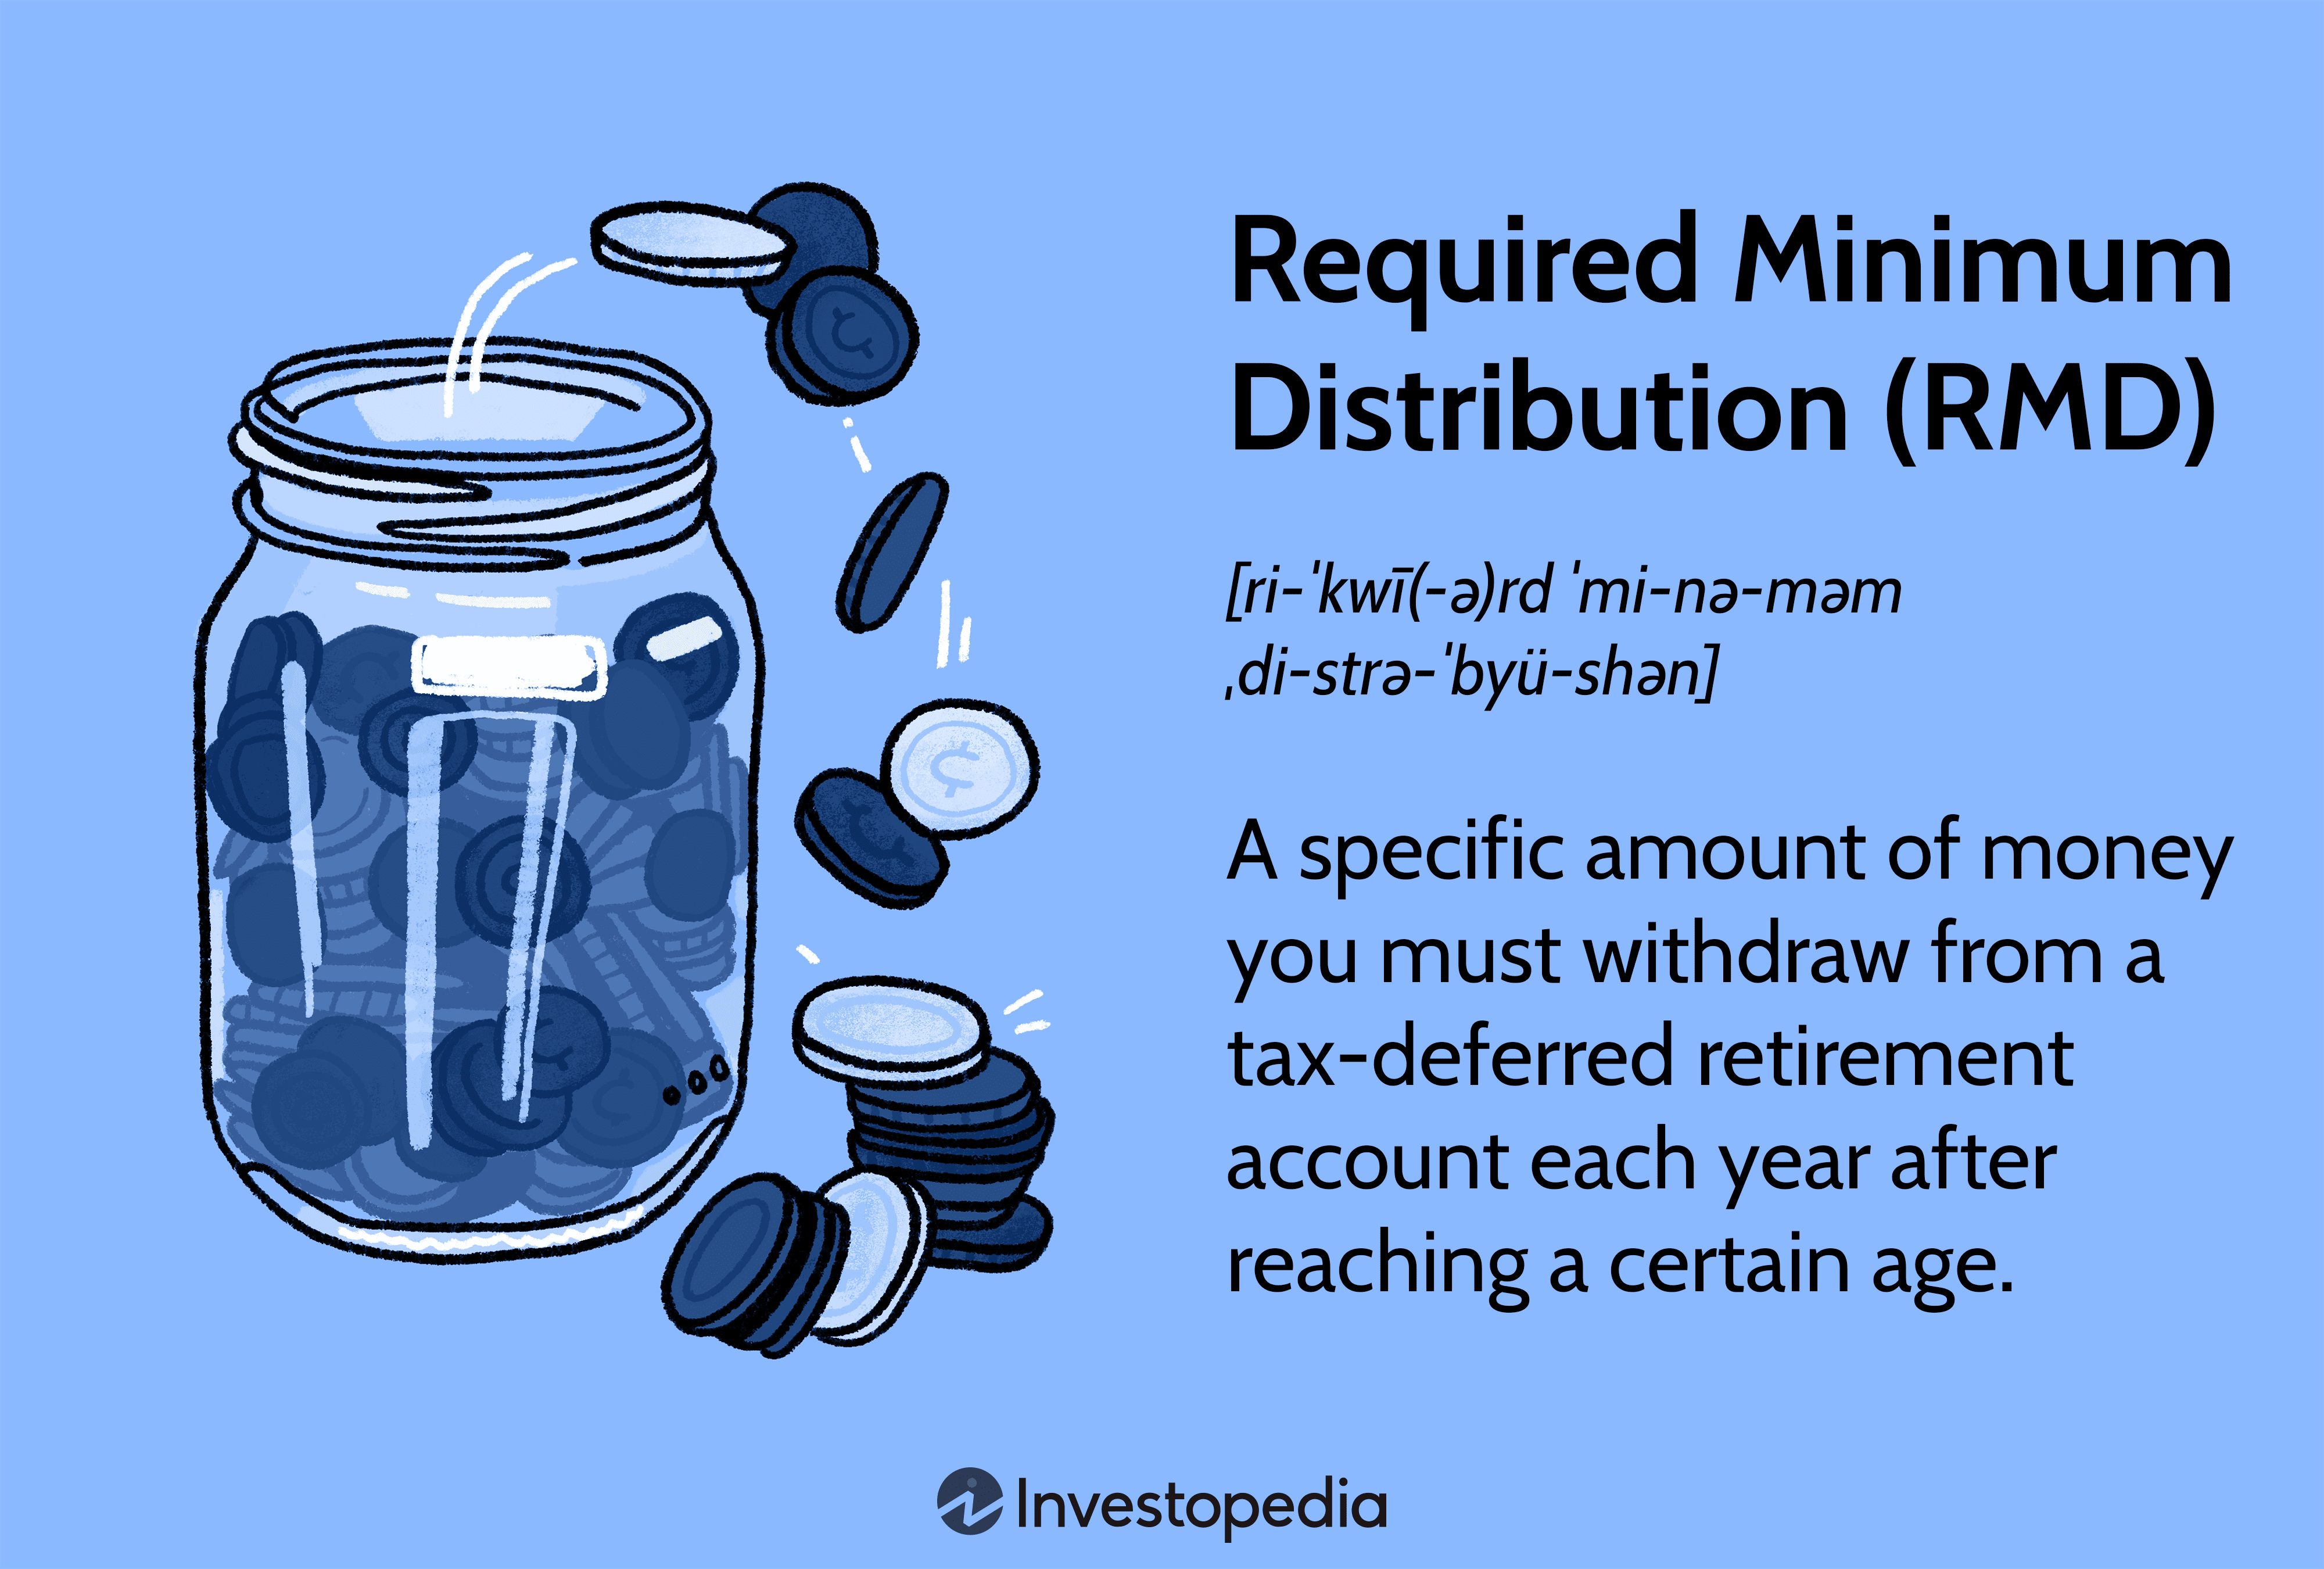 Required Minimum Distribution (RMD): A specific amount of money you must withdraw from a tax-deferred retirement account each year after reaching a certain age. 